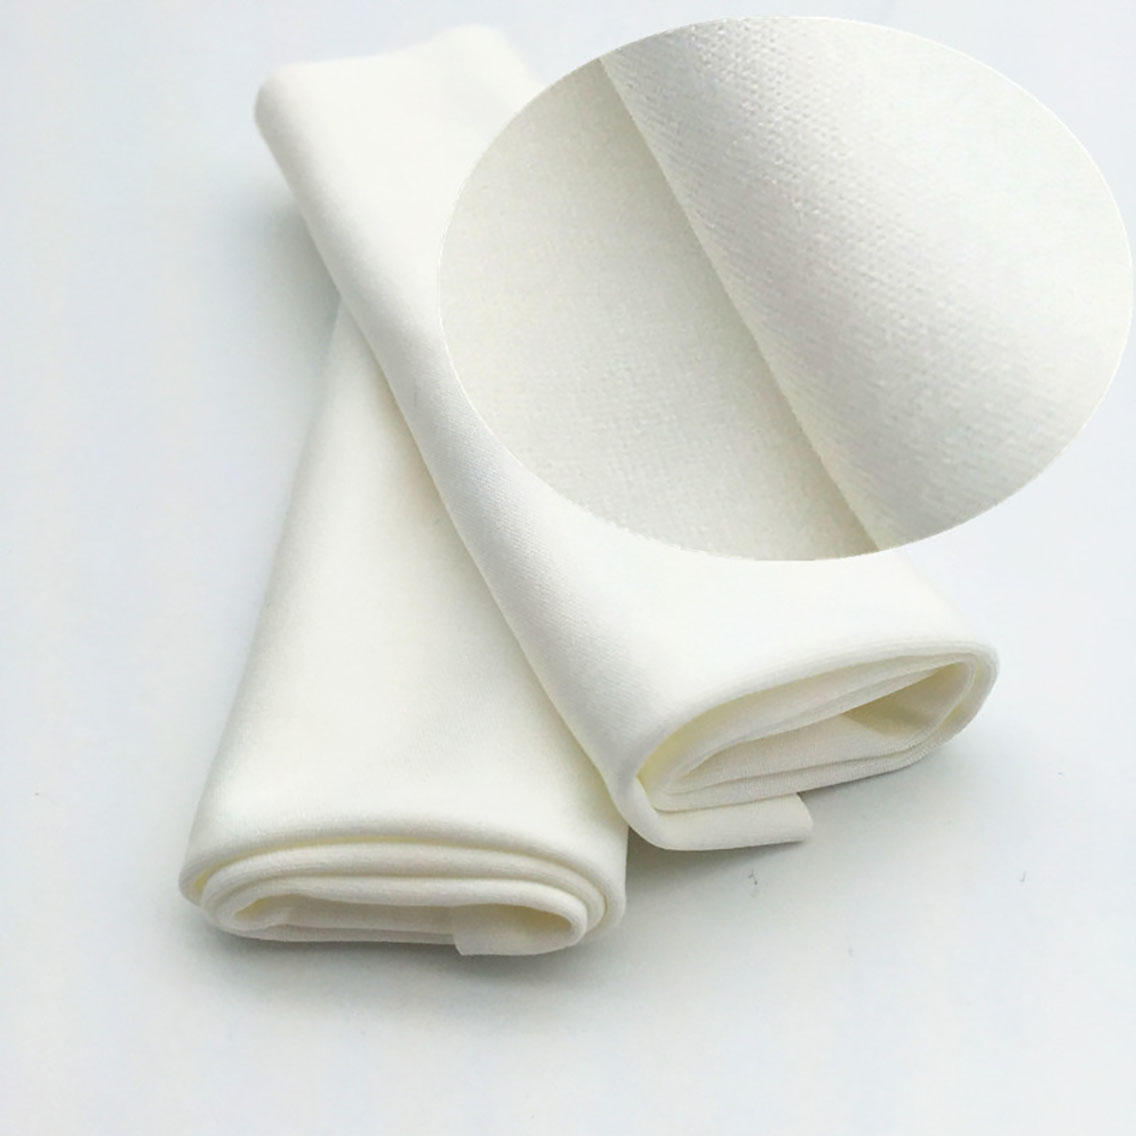 Cleanmo durable lens cloth manufacturer for medical device products